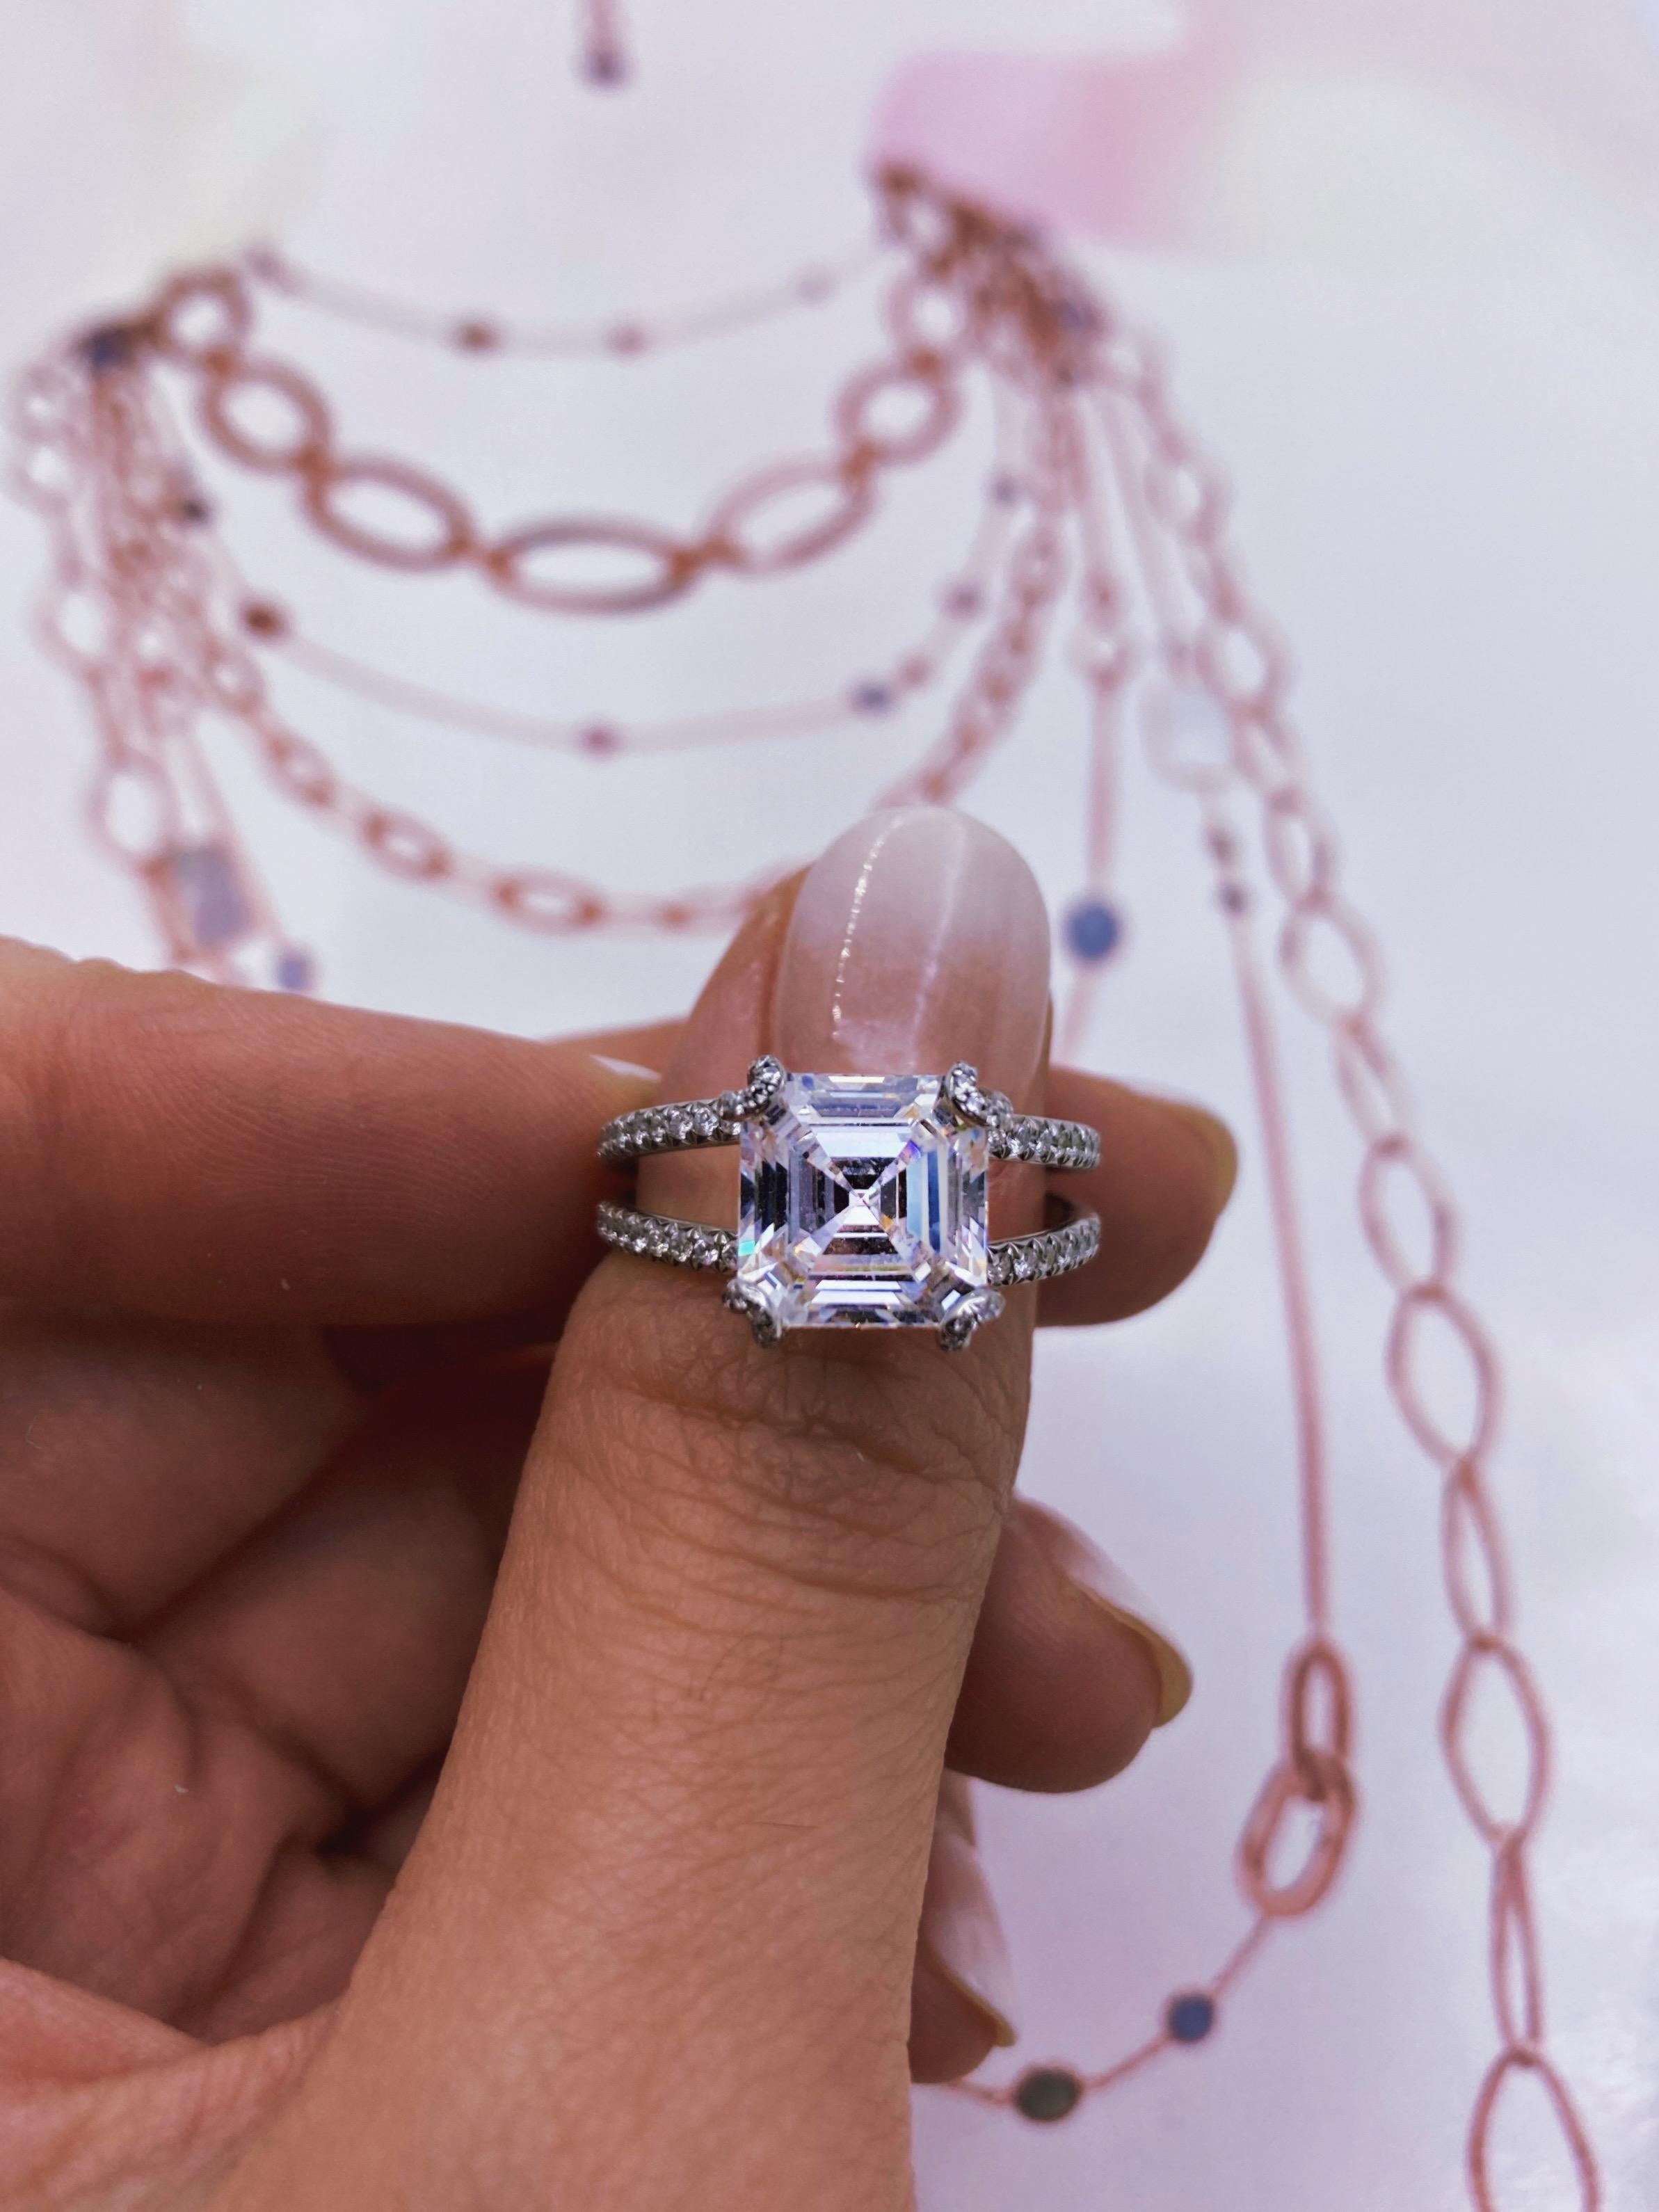 For Sale:  Platinum Engagement Ring with Center Diamond 4.00ct G-H SI2 Asscher Cut 3